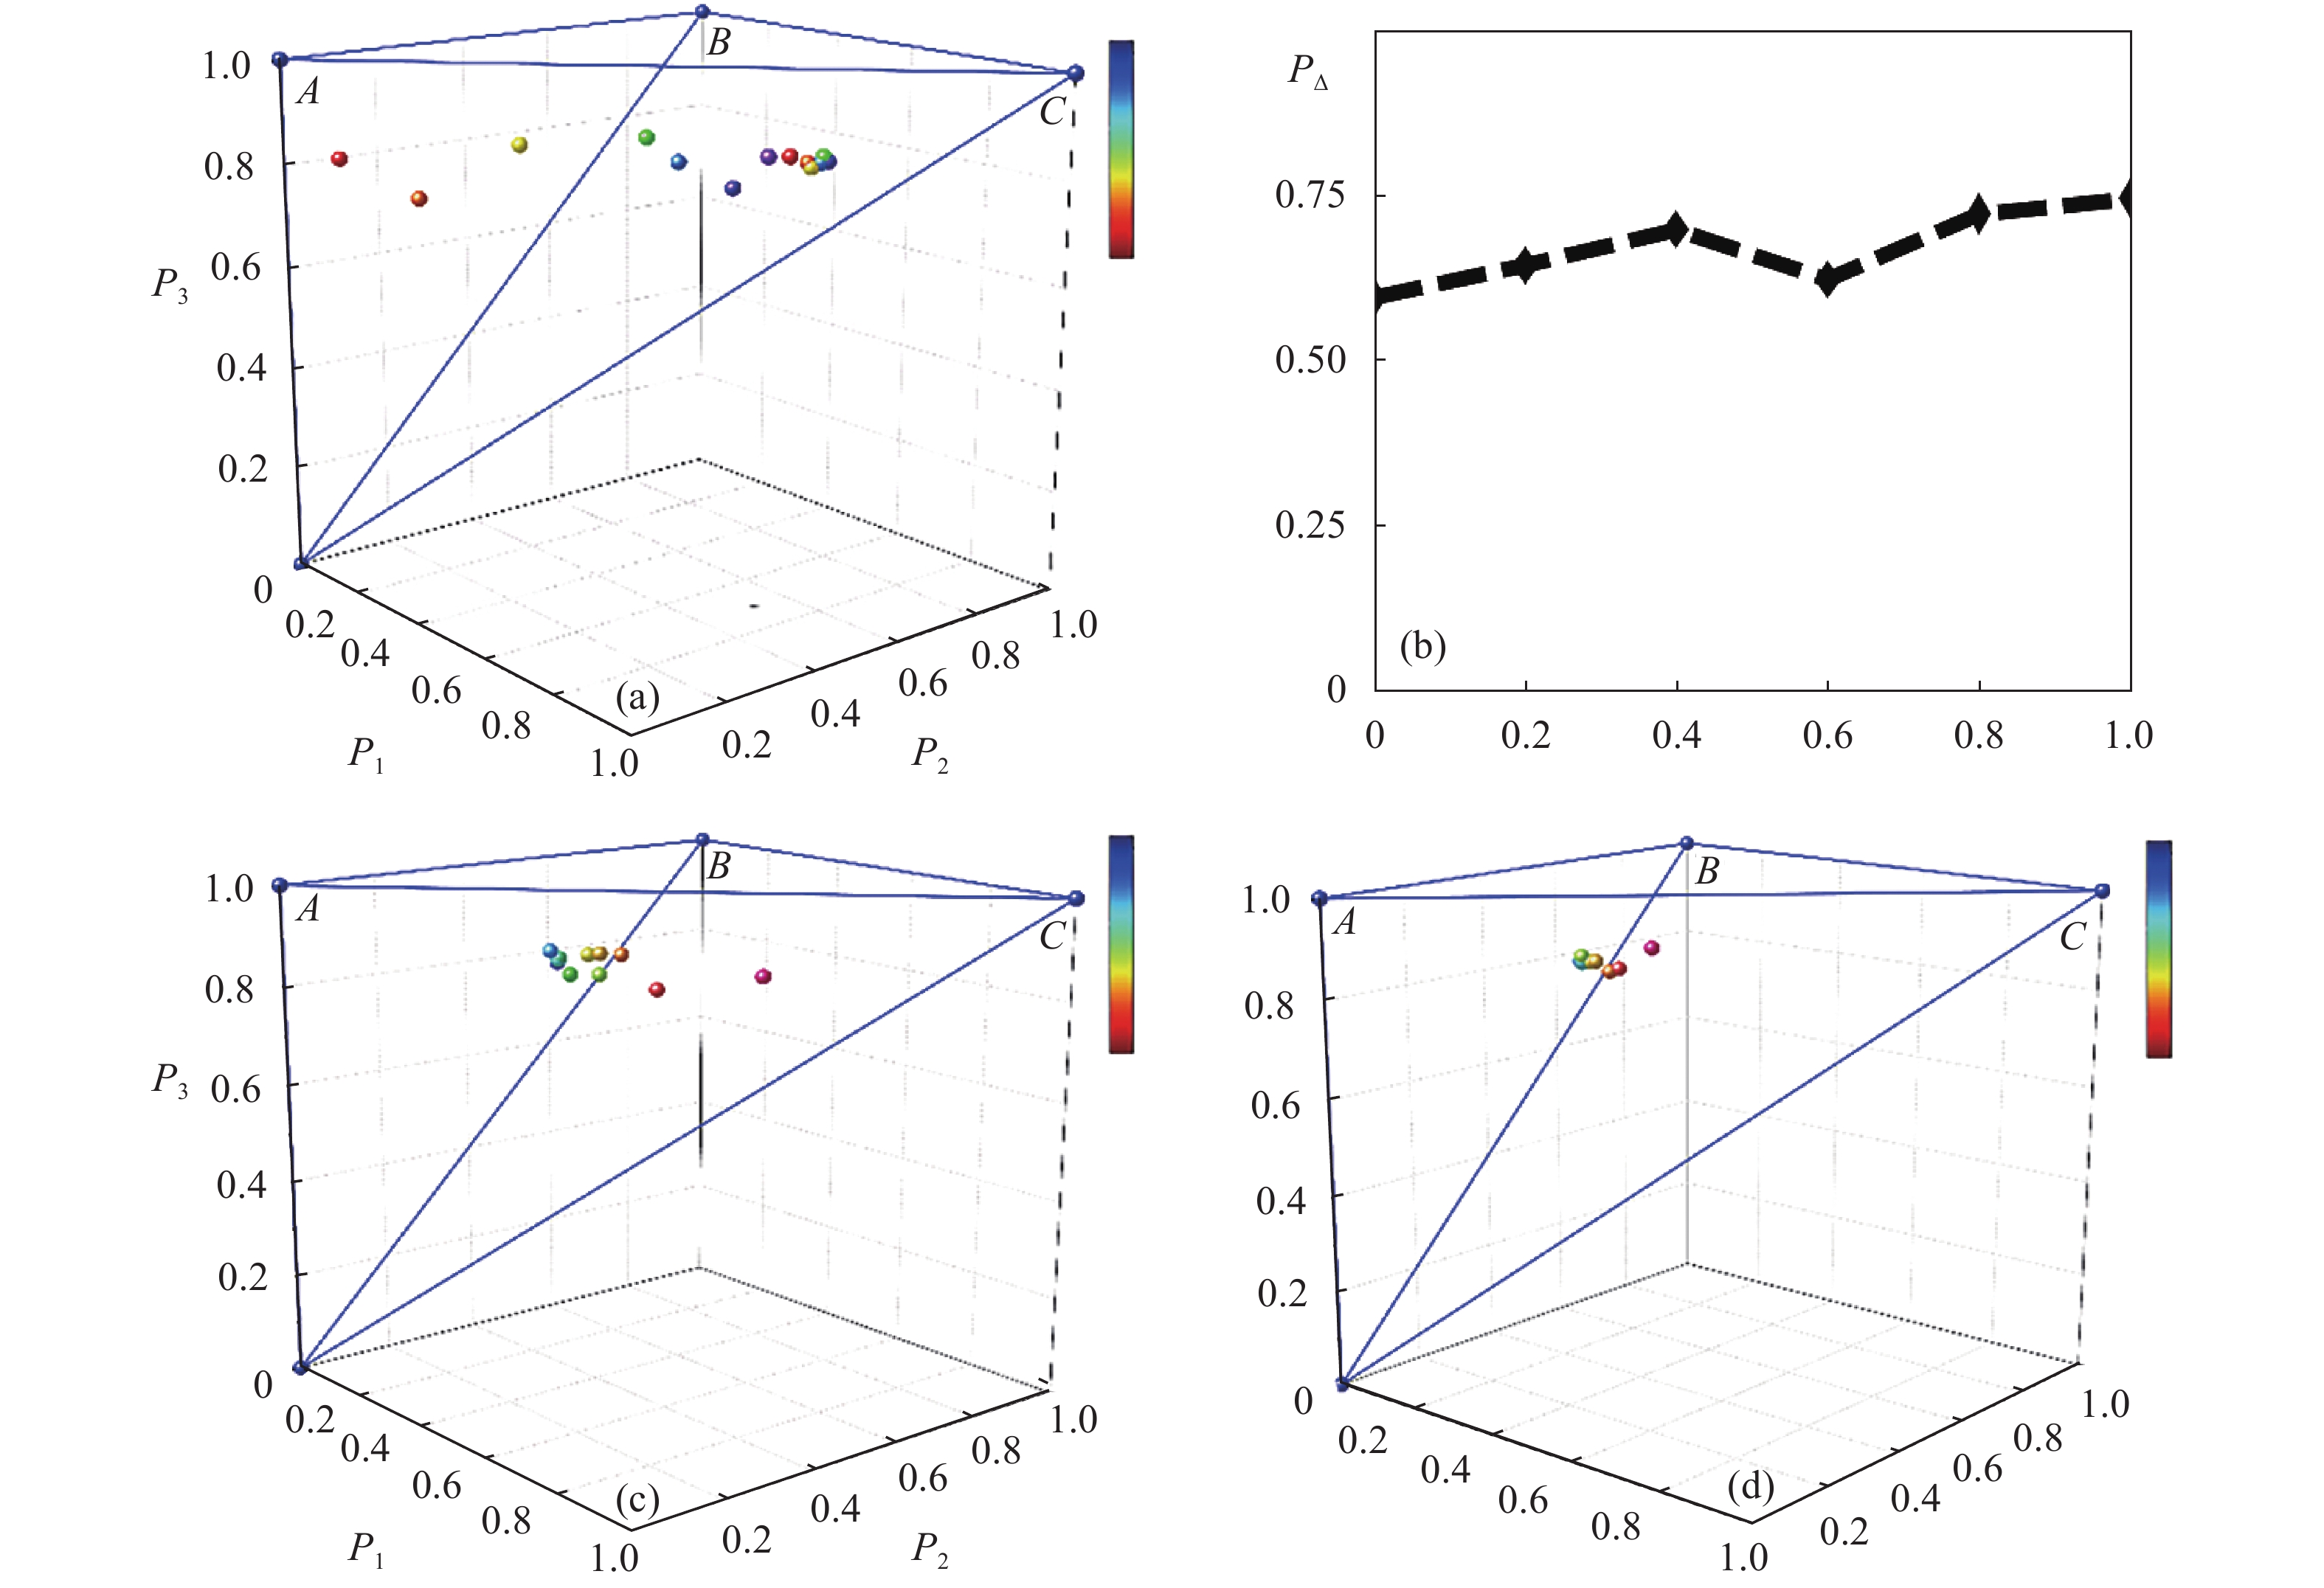 (a) , , varying with the proportion of small particles in the purity space (backward detection); (b) of scattering medium as a function of the proportion of small particles (forward detection); (c) , , varying with different mean values for standard deviation of 0.01 μm (backward detection); (d) , , varying with different mean values for standard deviation of 1.05 μm (backward detection)(a) 、 、随大小微粒混合体积比的变化（后向探测）；(b)大小微粒混合体积比对散射介质的退偏指数的影响（前向探测）；(c)粒子标准差为0.01 μm时，、 、 随粒子均值的变化（后向探测）；(d) 粒子标准差为1.05 μm时，、 、 随粒子均值的变化（后向探测）